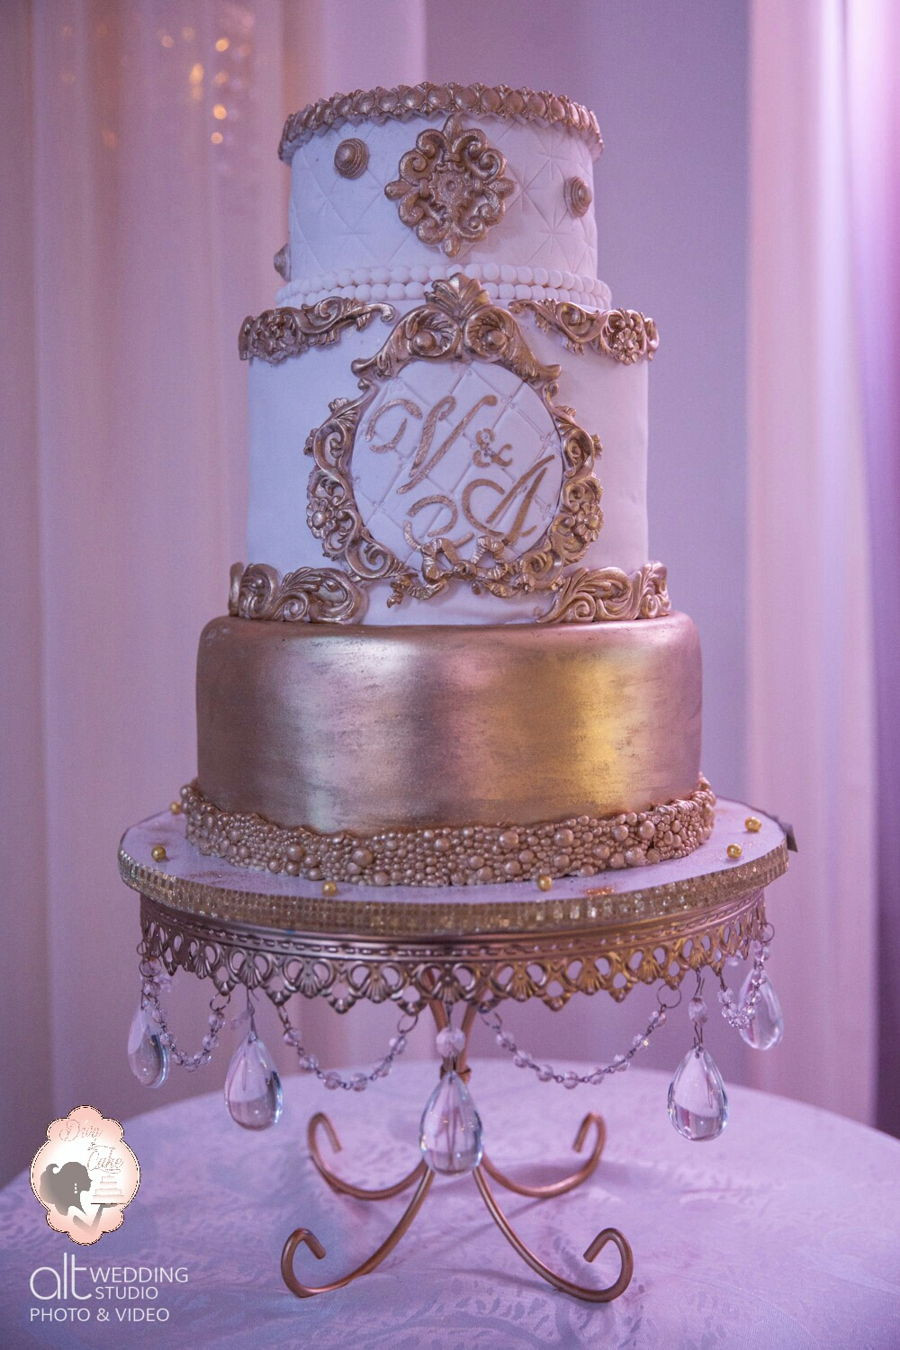 Wedding Cake White And Gold
 Baroque Wedding Cake White & Gold CakeCentral